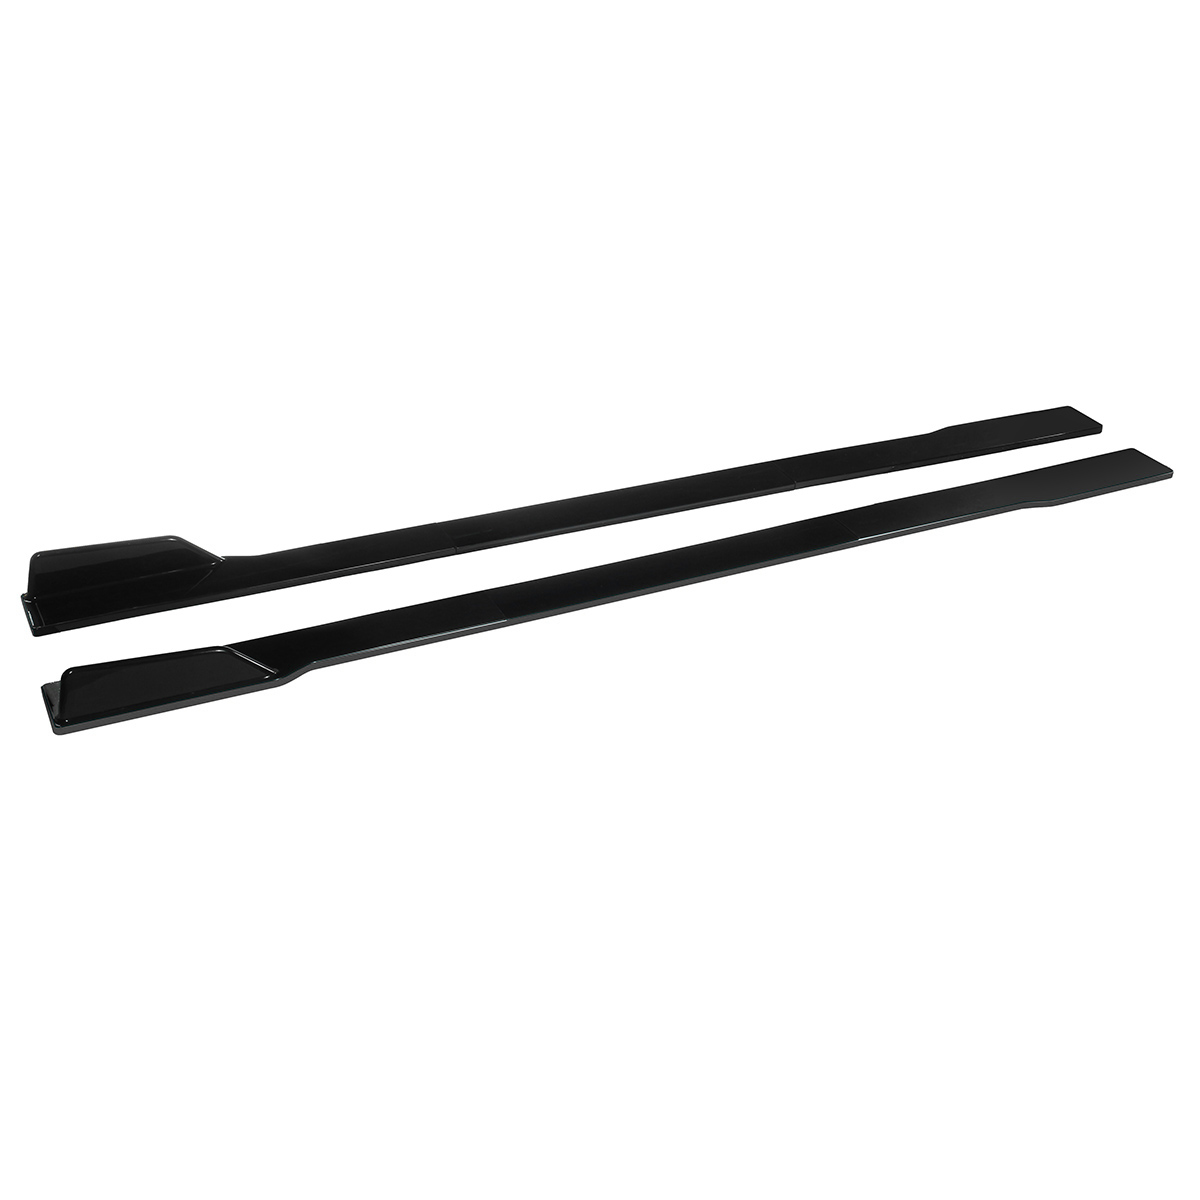 Find 2.2M / 86.6inch Black Modified Three-section Side Skirts Extension Rocker Panel For Chrysler 300 SRT All Models for Sale on Gipsybee.com with cryptocurrencies